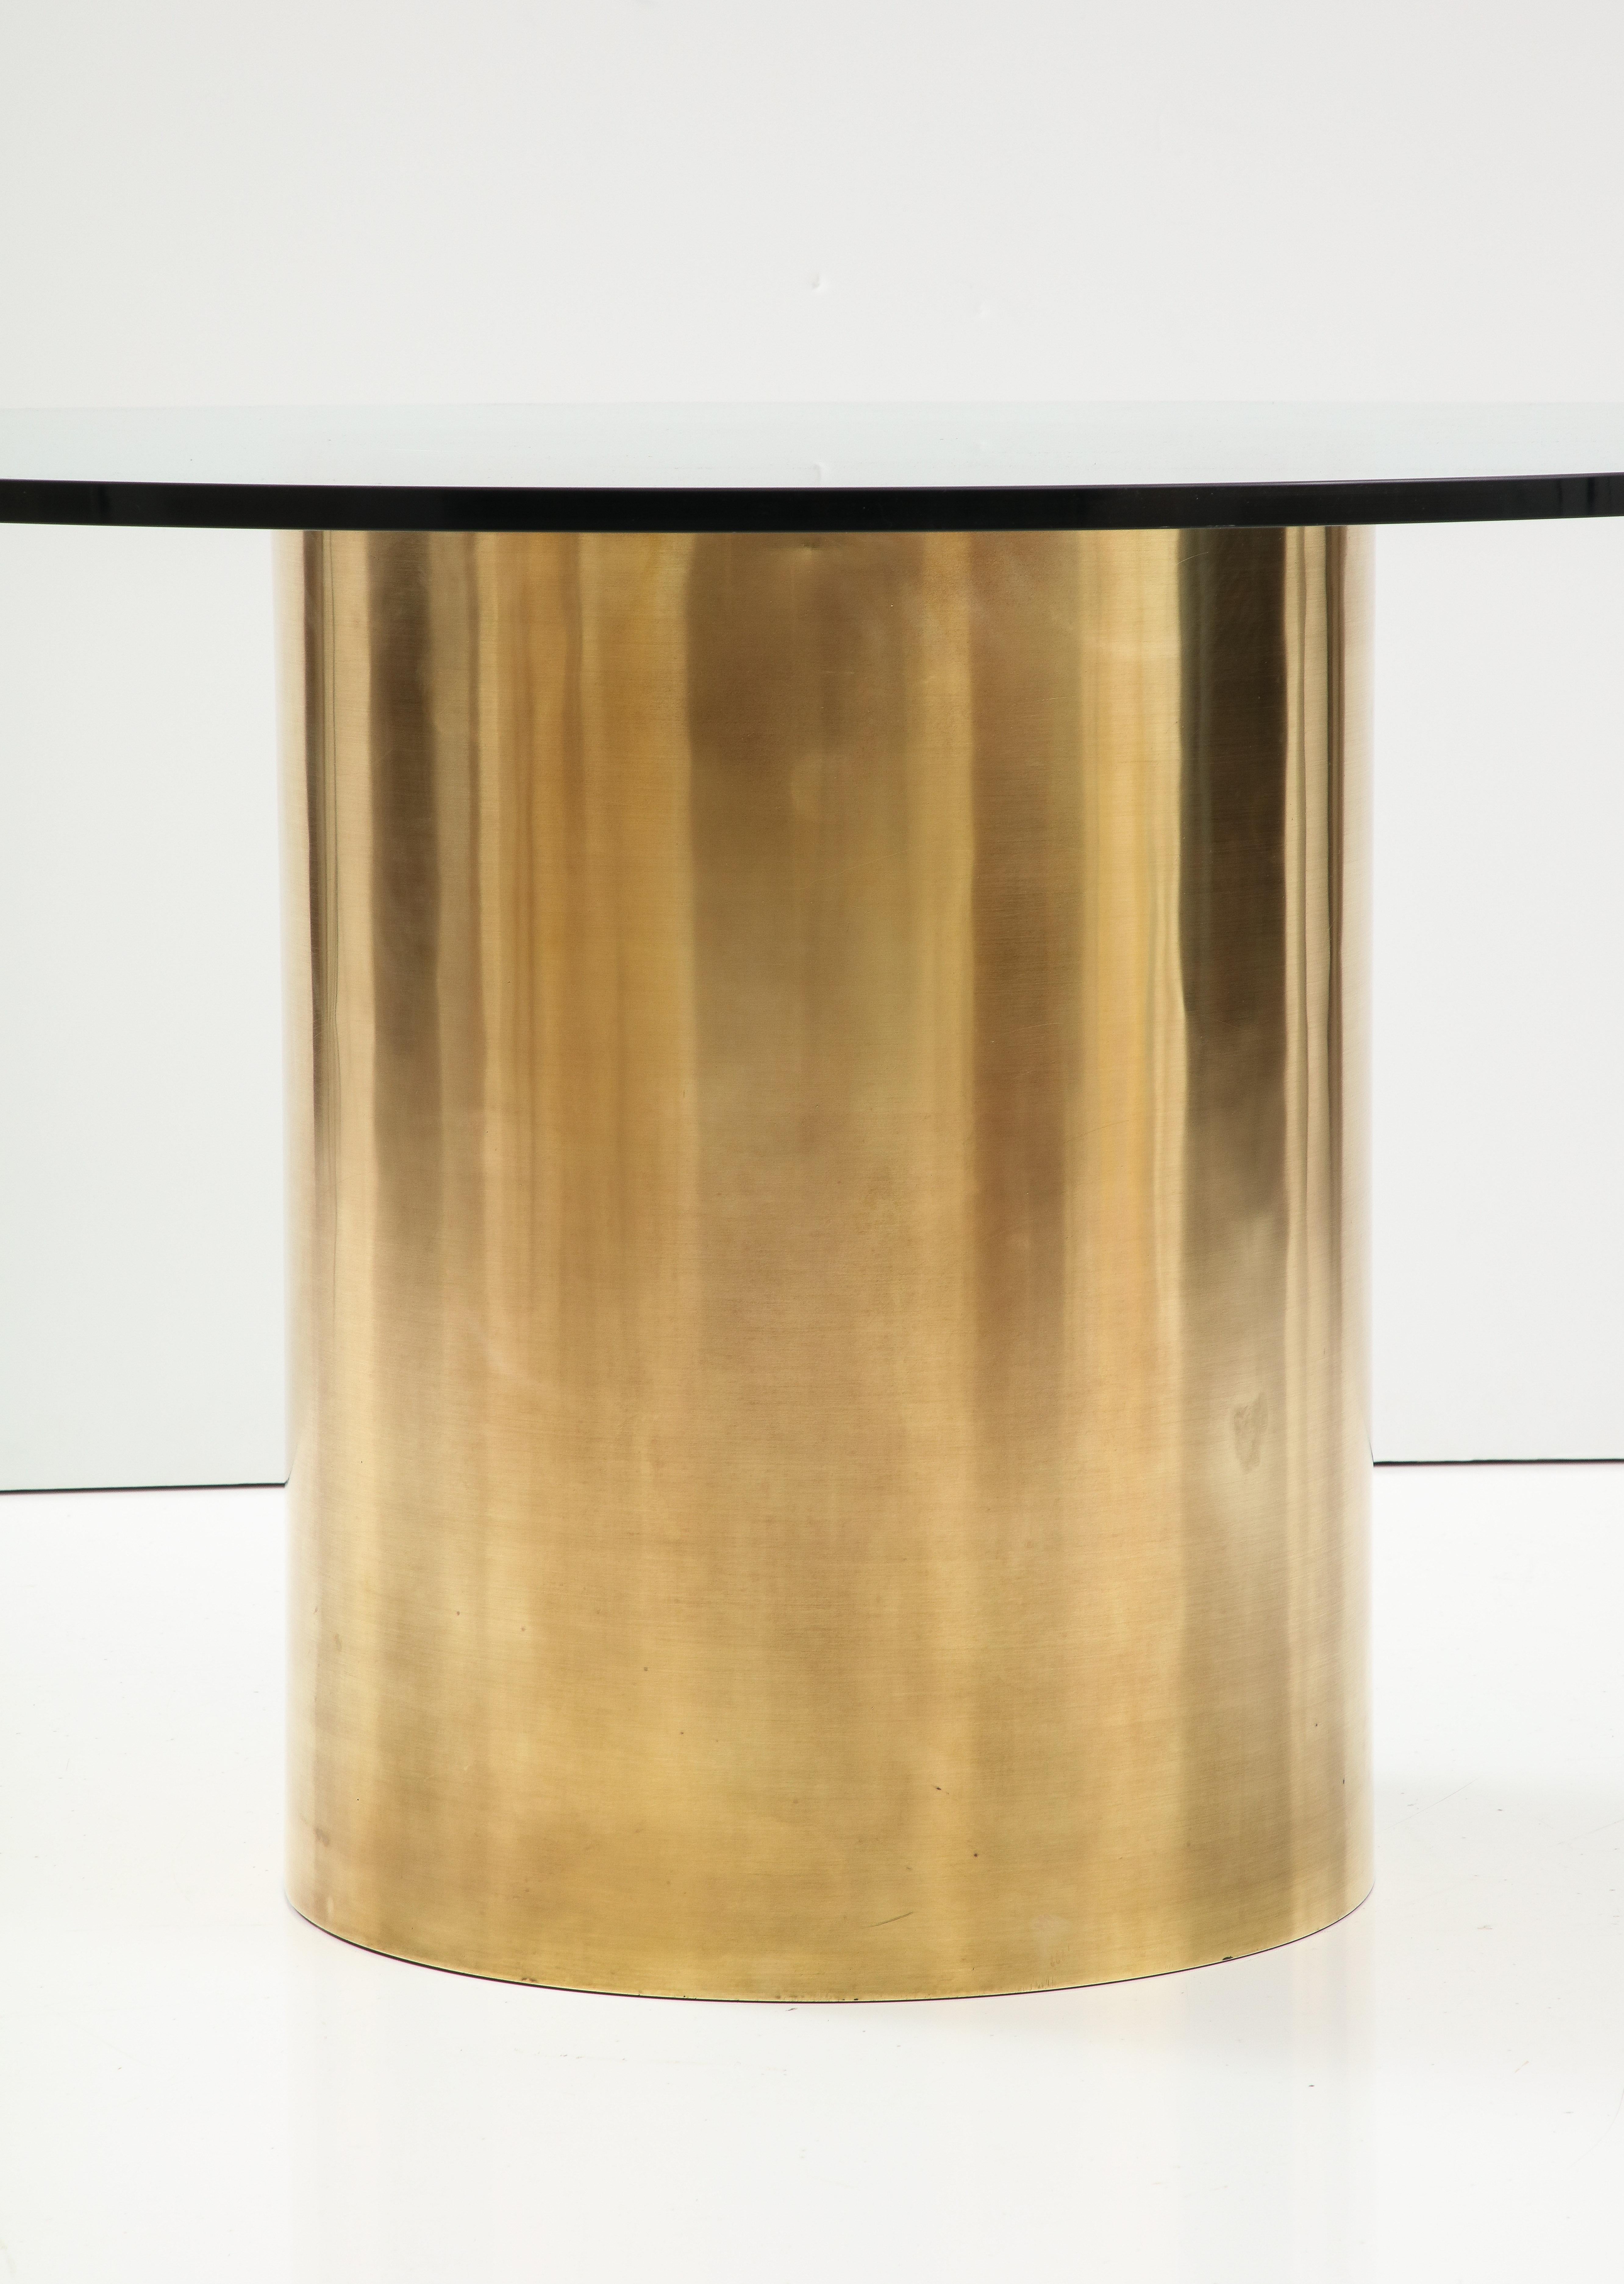 American 1970's Mid-Century Modern Brass Drum Dining Table Attributed To Brueton For Sale